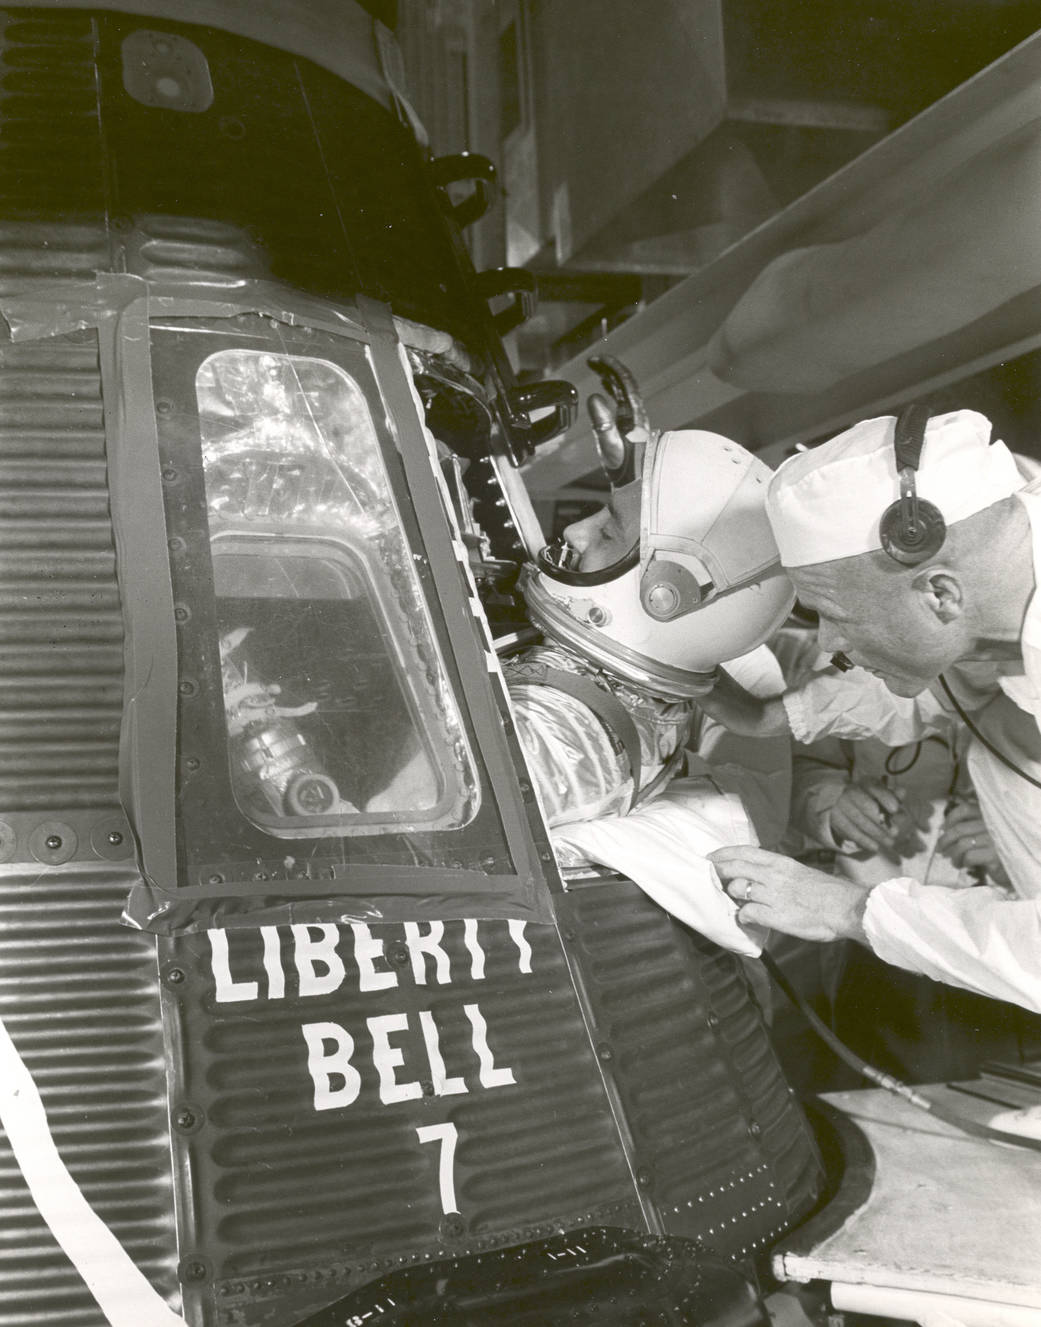 Gus Grissom is helped into the Liberty Bell 7spacecraft